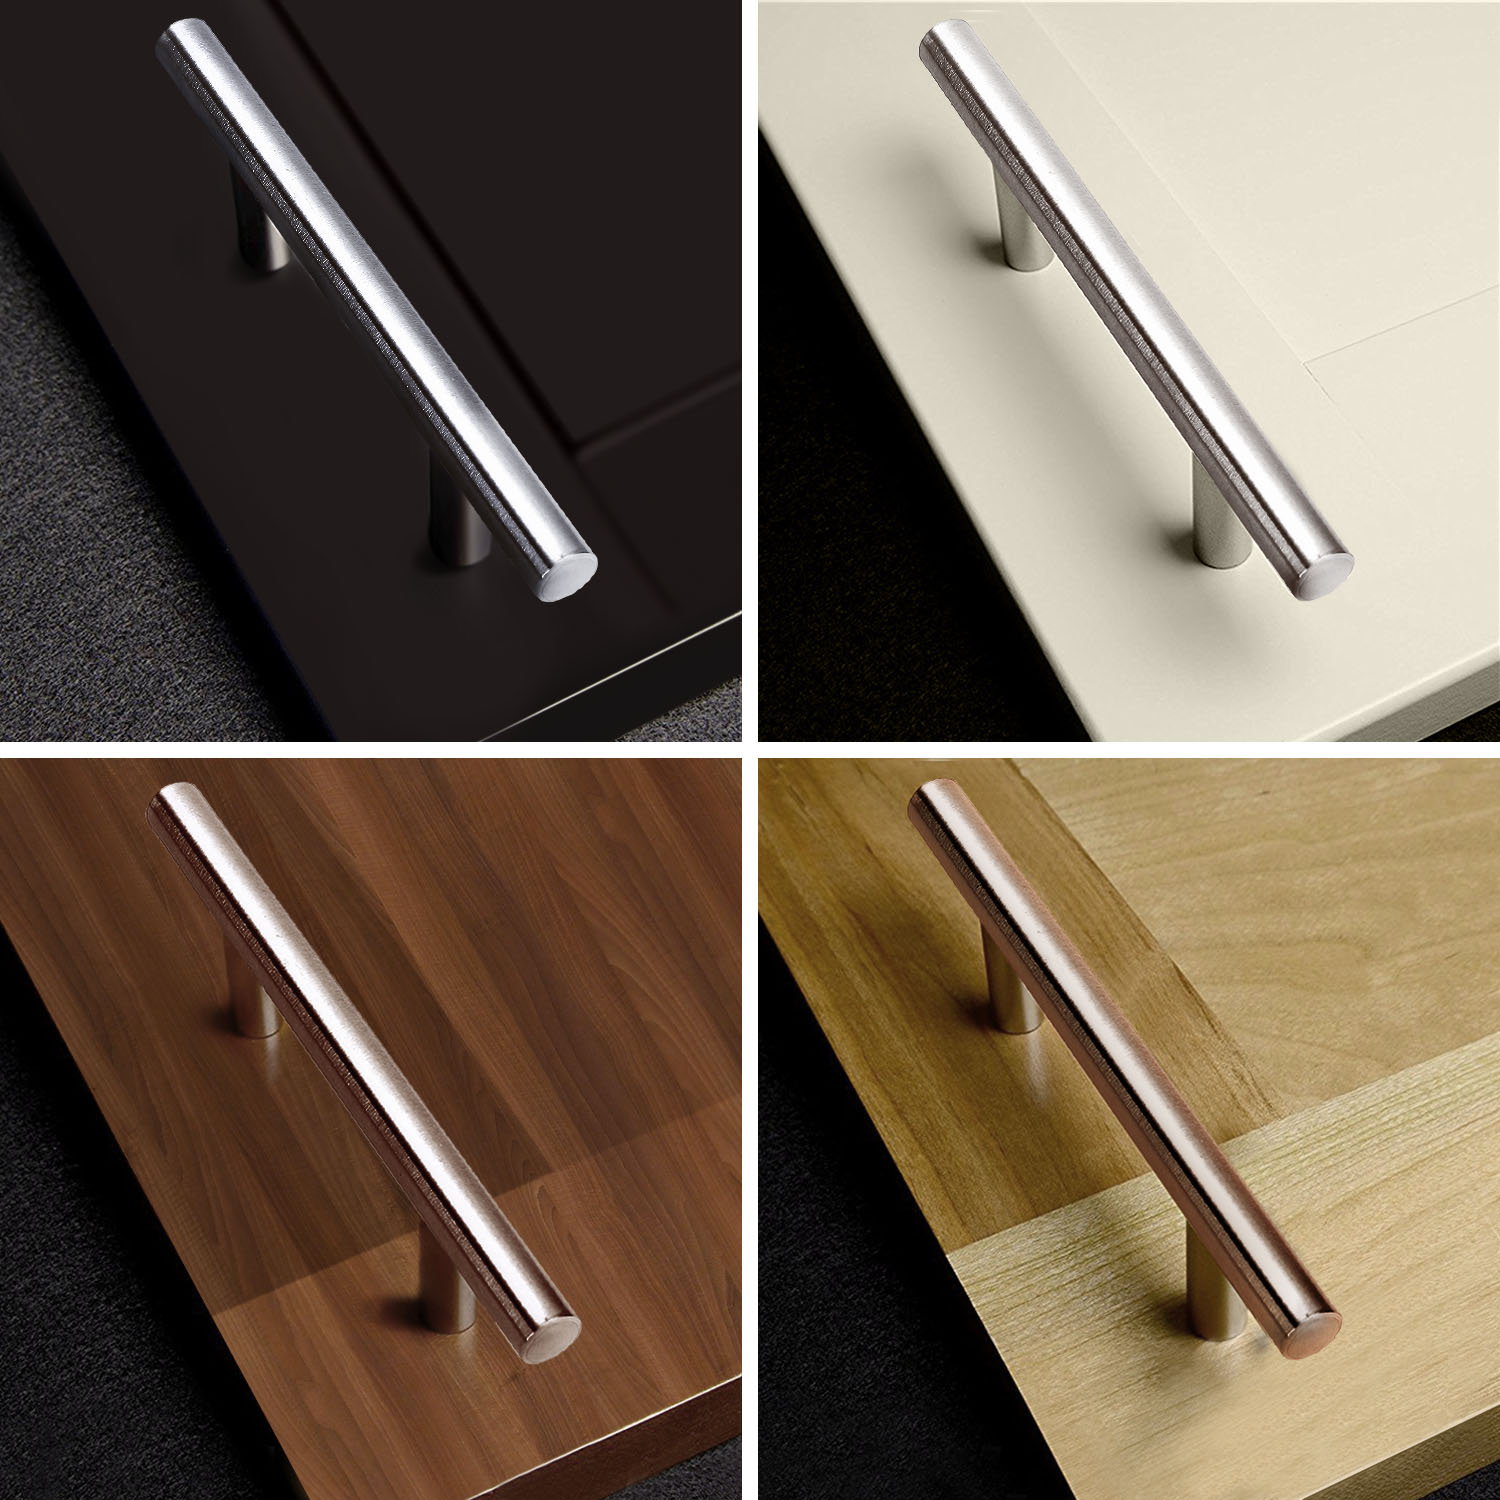 1 Pack Kitchen Cabinet Handles Silver Drawer Pulls 4 inch, 2.5 inch Hole Center, Solid Stainless Steel T Bar with Satin Brushed Nickel, Hardware for Kitchen Cupboard Door Bathroom Furniture - image 4 of 7